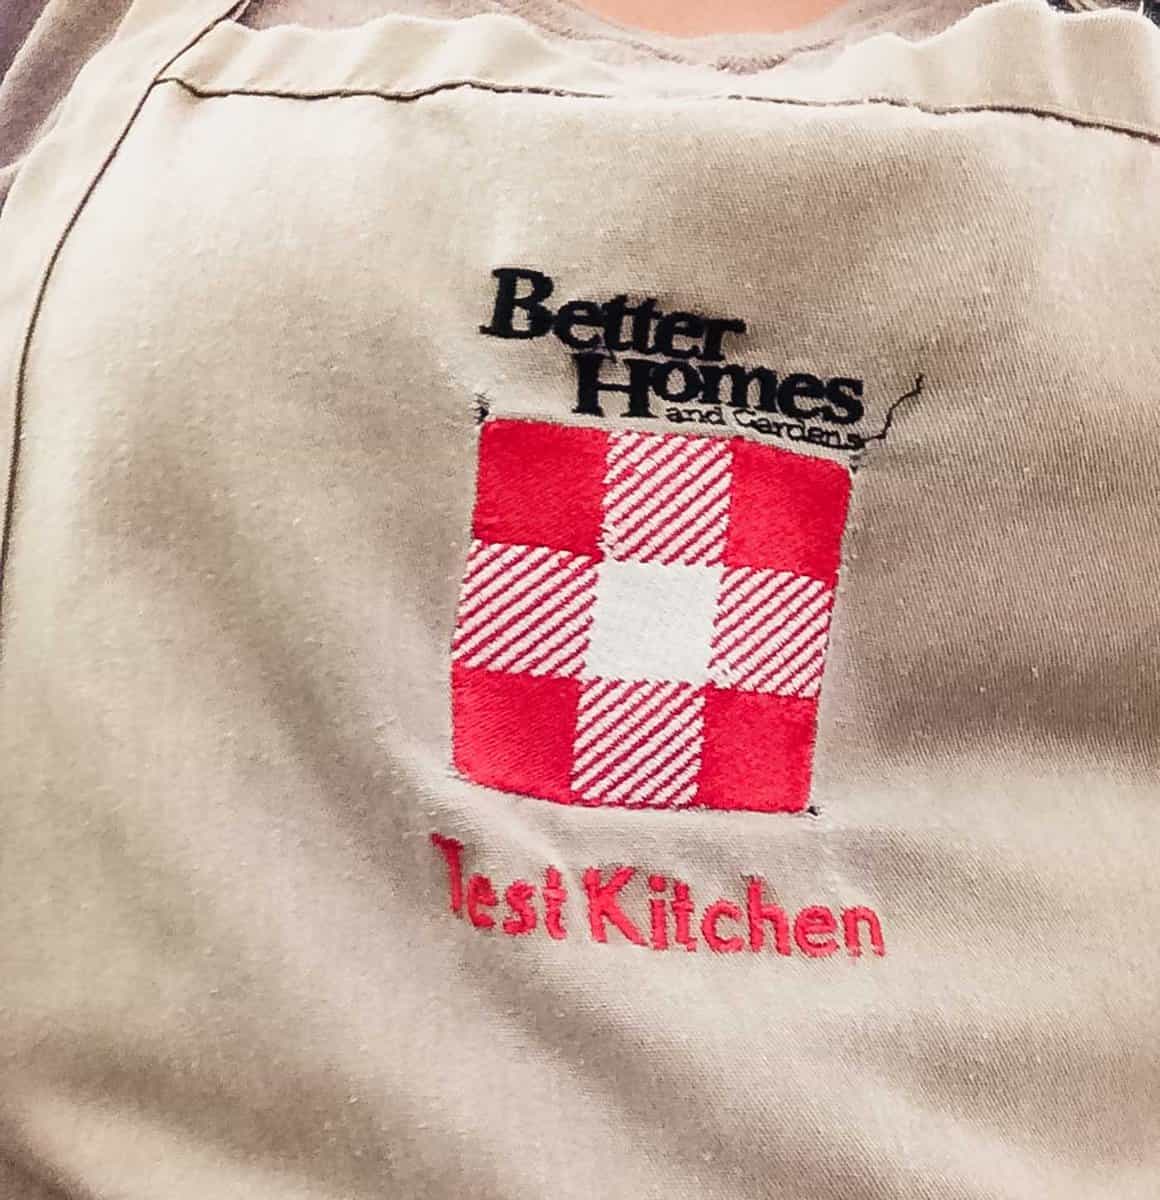 Photograph of a Better Homes & Gardens Apron